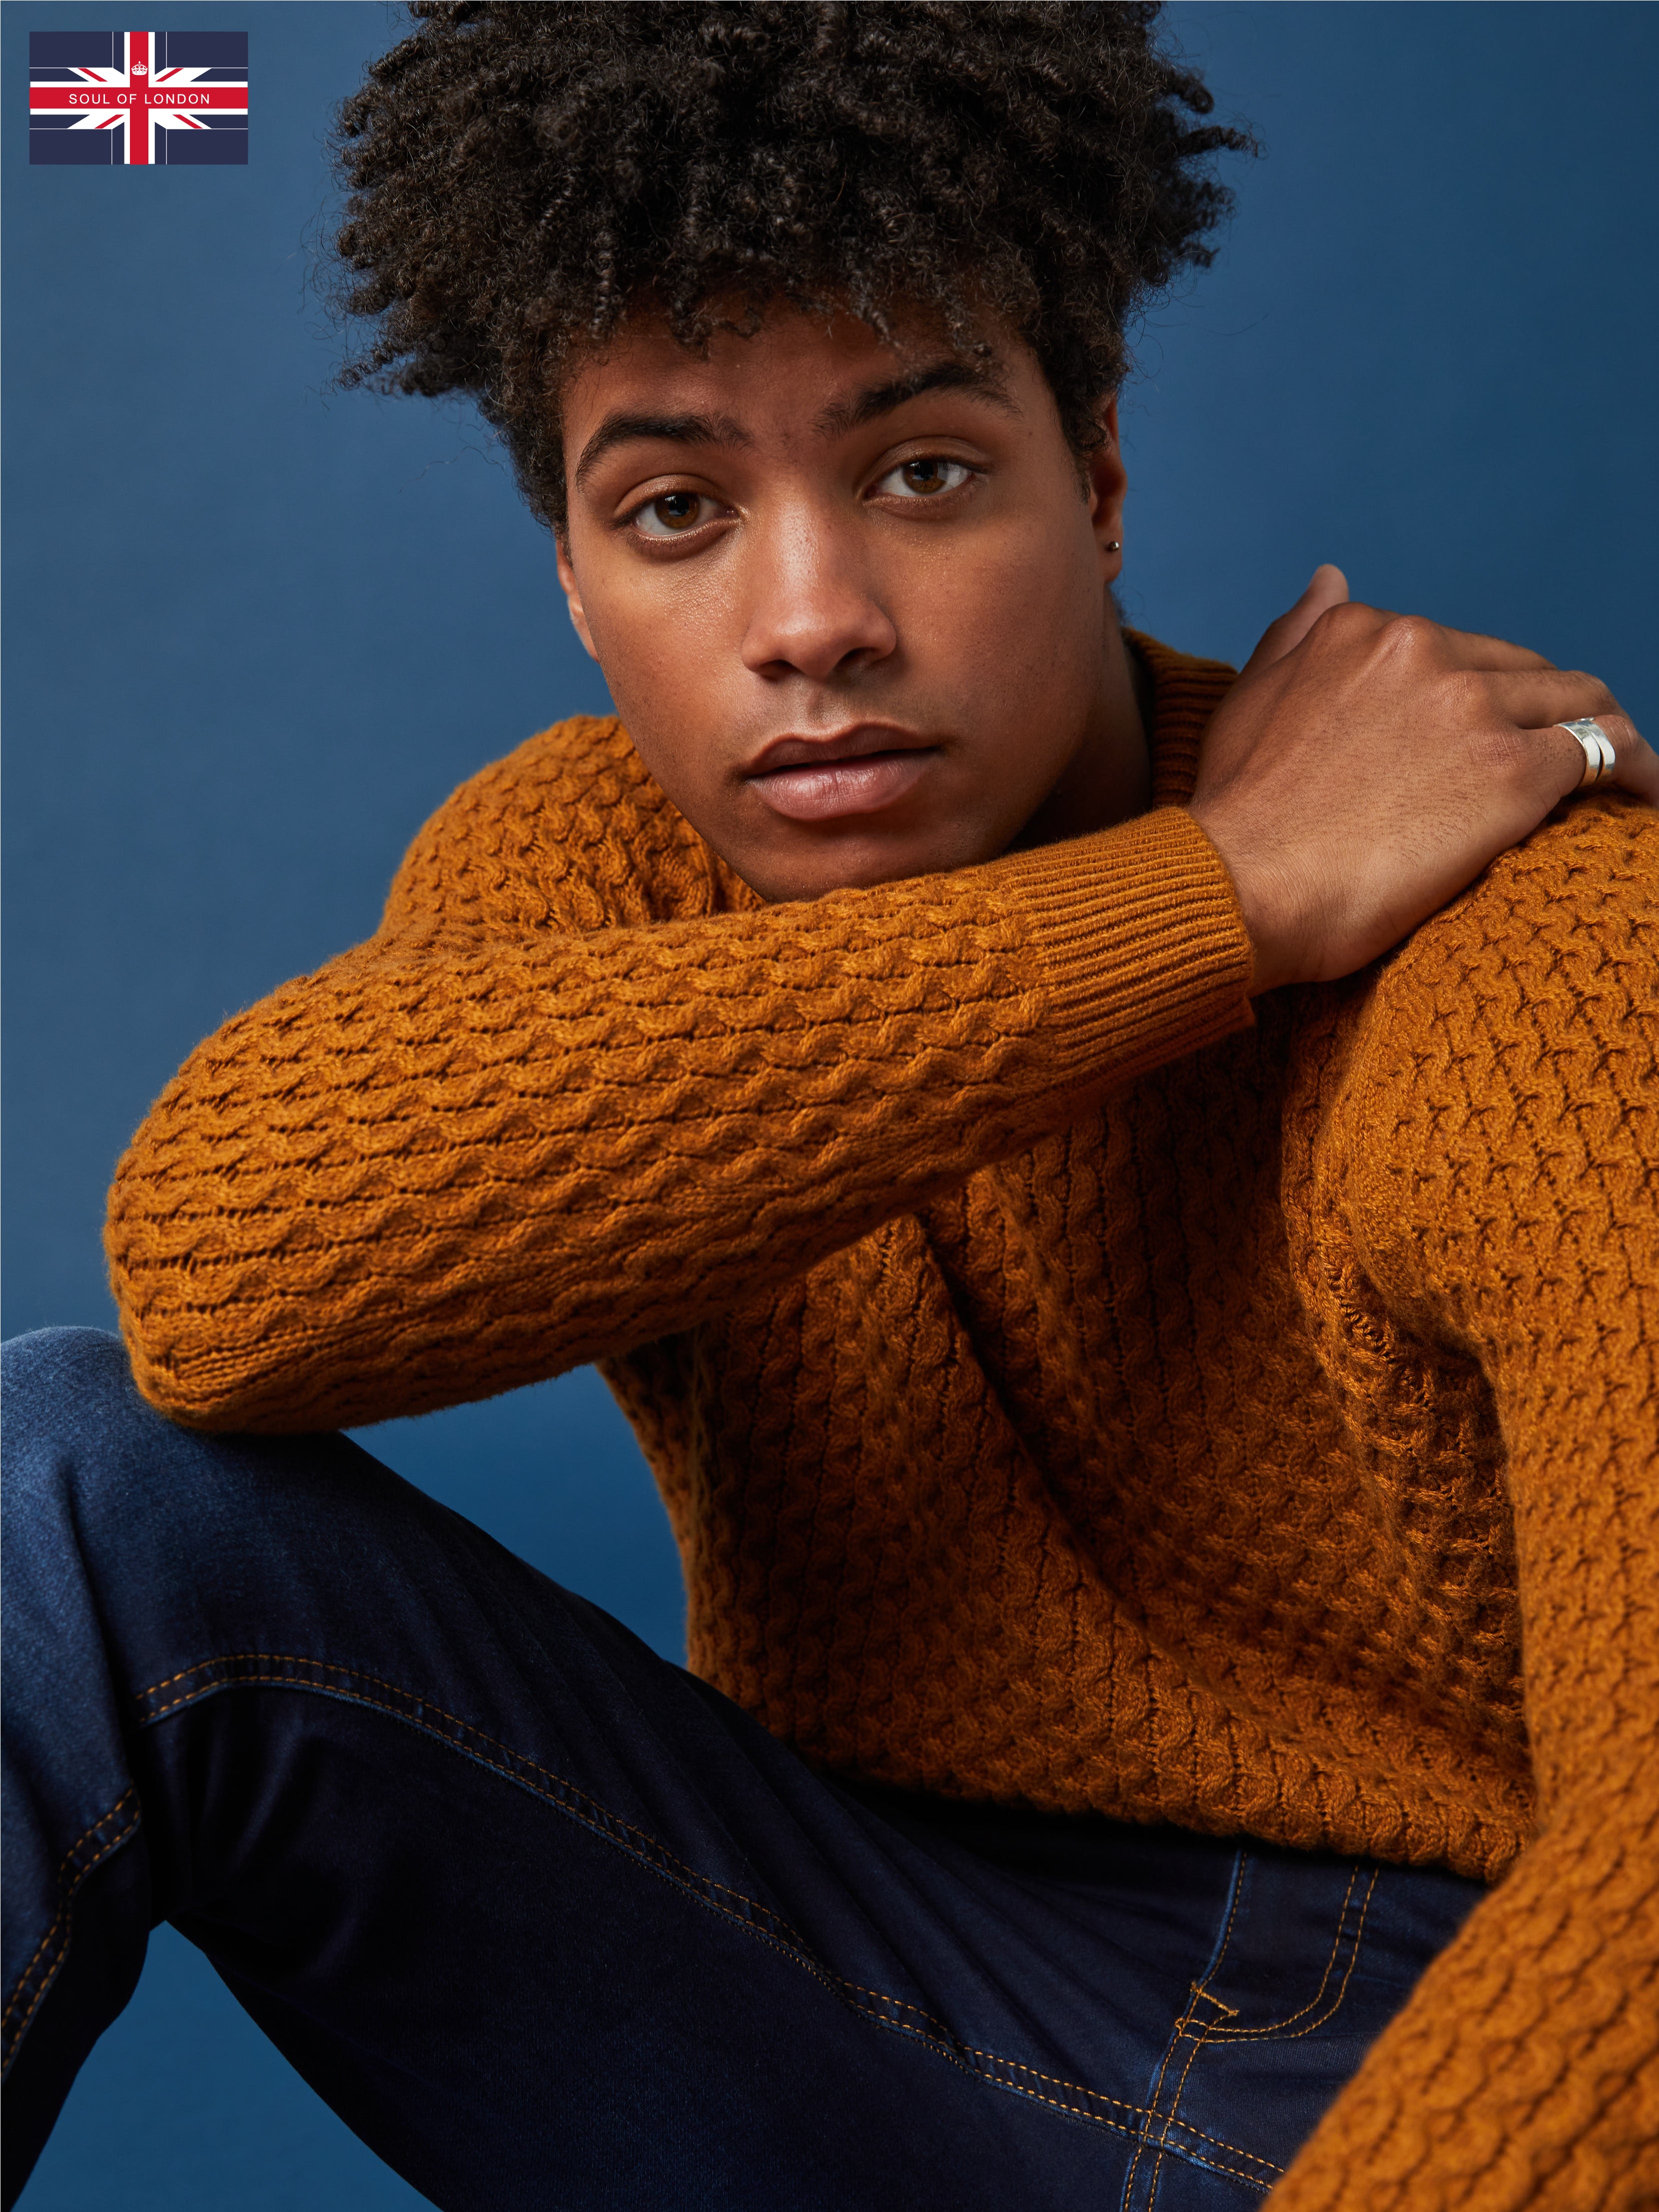 Modern and sophisticated, this soft 100% Organic Cotton crew neck sweater has a textured knit pattern to add some interest to this cold weather wardrobe staple.  Available in Black, Light Grey and Mustard 